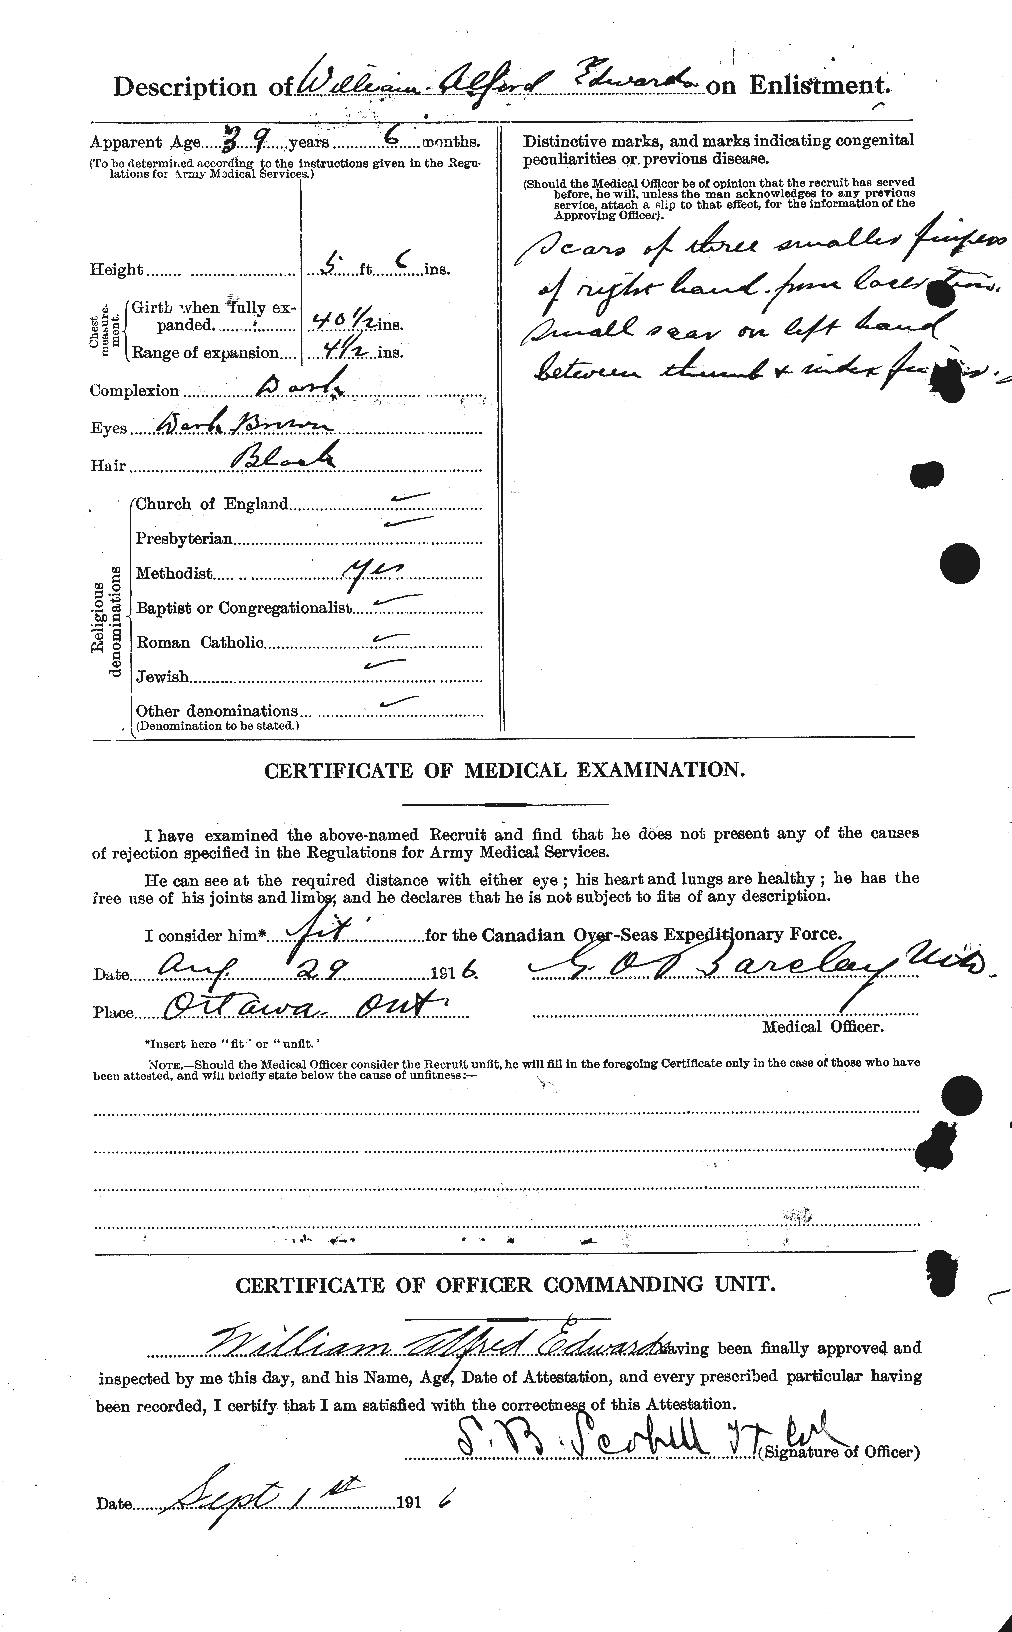 Personnel Records of the First World War - CEF 310409b